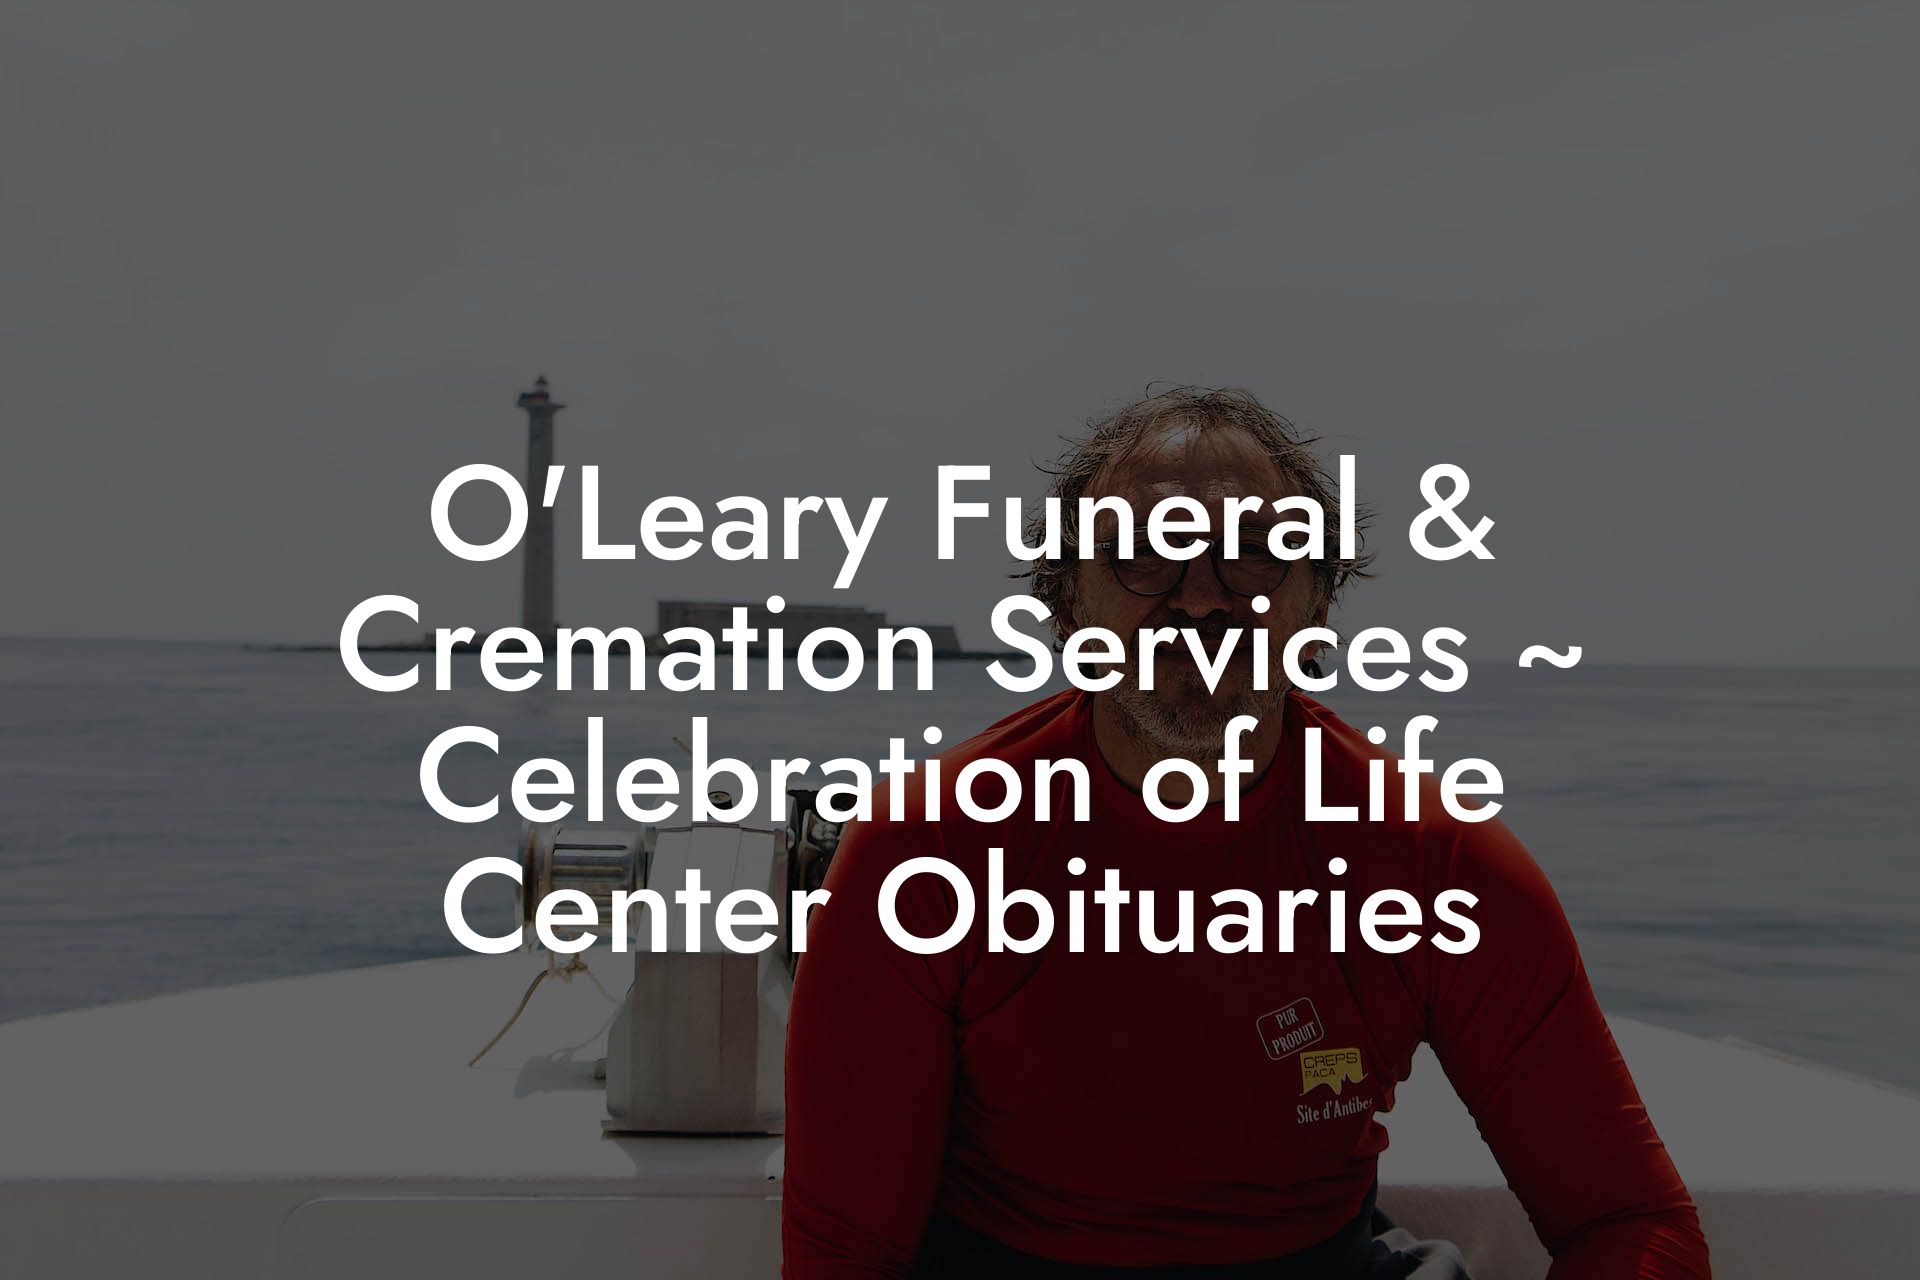 O'Leary Funeral & Cremation Services ~ Celebration of Life Center Obituaries